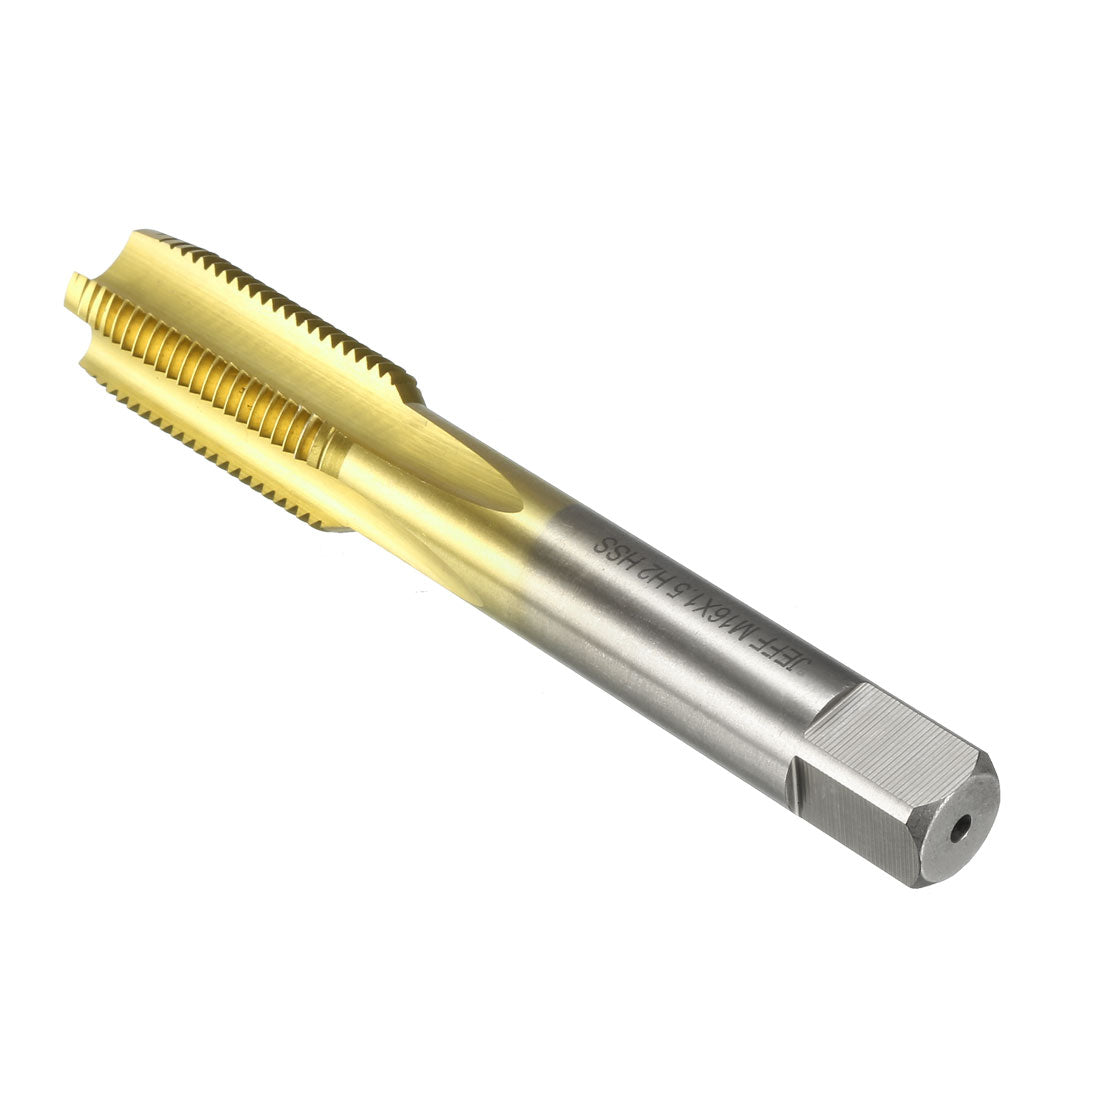 uxcell Uxcell Metric Tap M16 x 1.5 H2 Right Hand Thread Plug Ti-coated for Threading Tapping